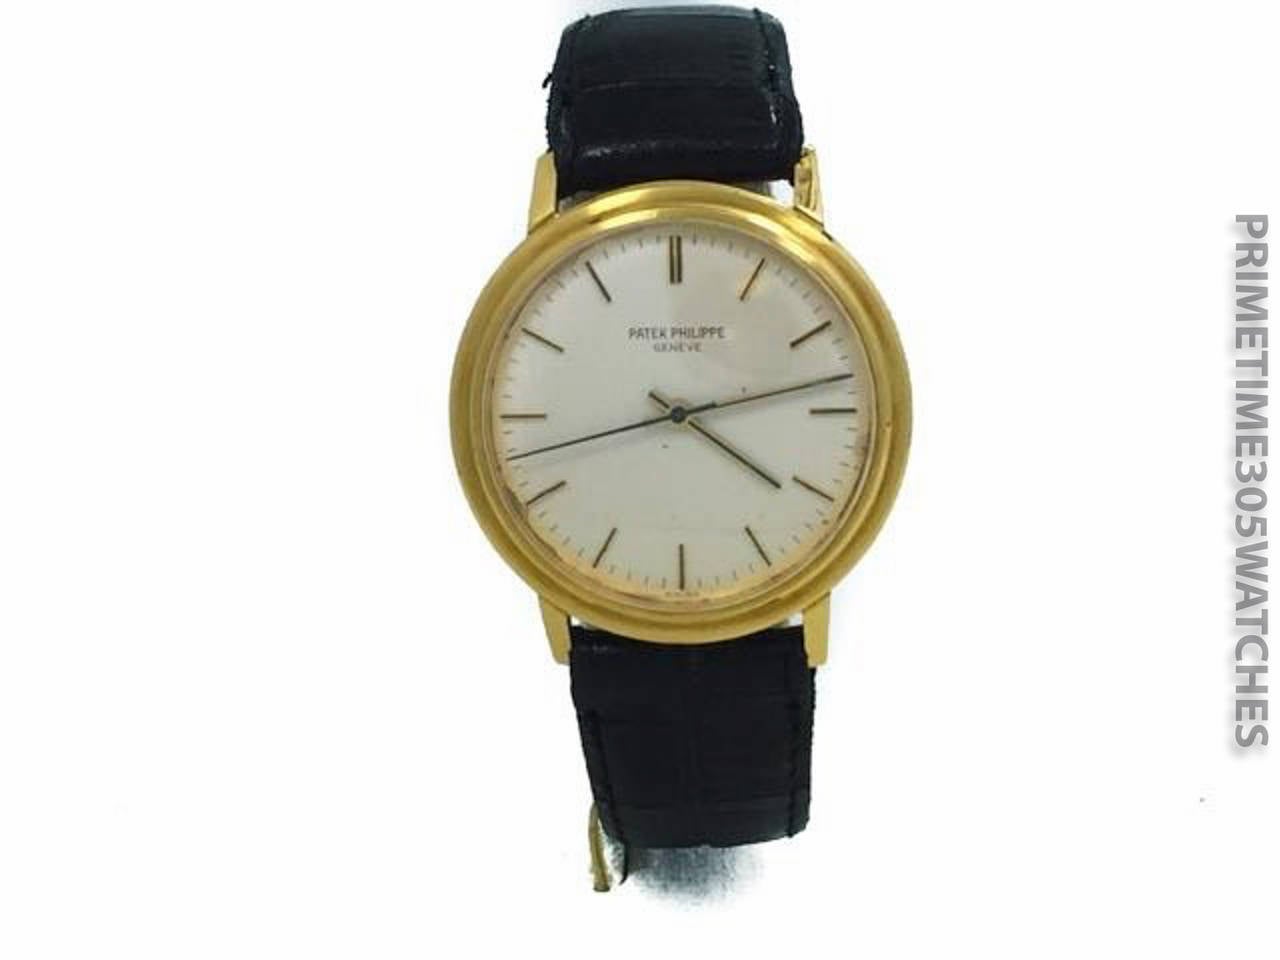 Mens Patek Philippe Calatrava 18k Yellow Gold Automatic Back Wind Watch. The Watch is in Great Condition w/ Few Small Marks on Dial and Keeping Perfect time. The Watch is on a Generic Strap & Buckle.